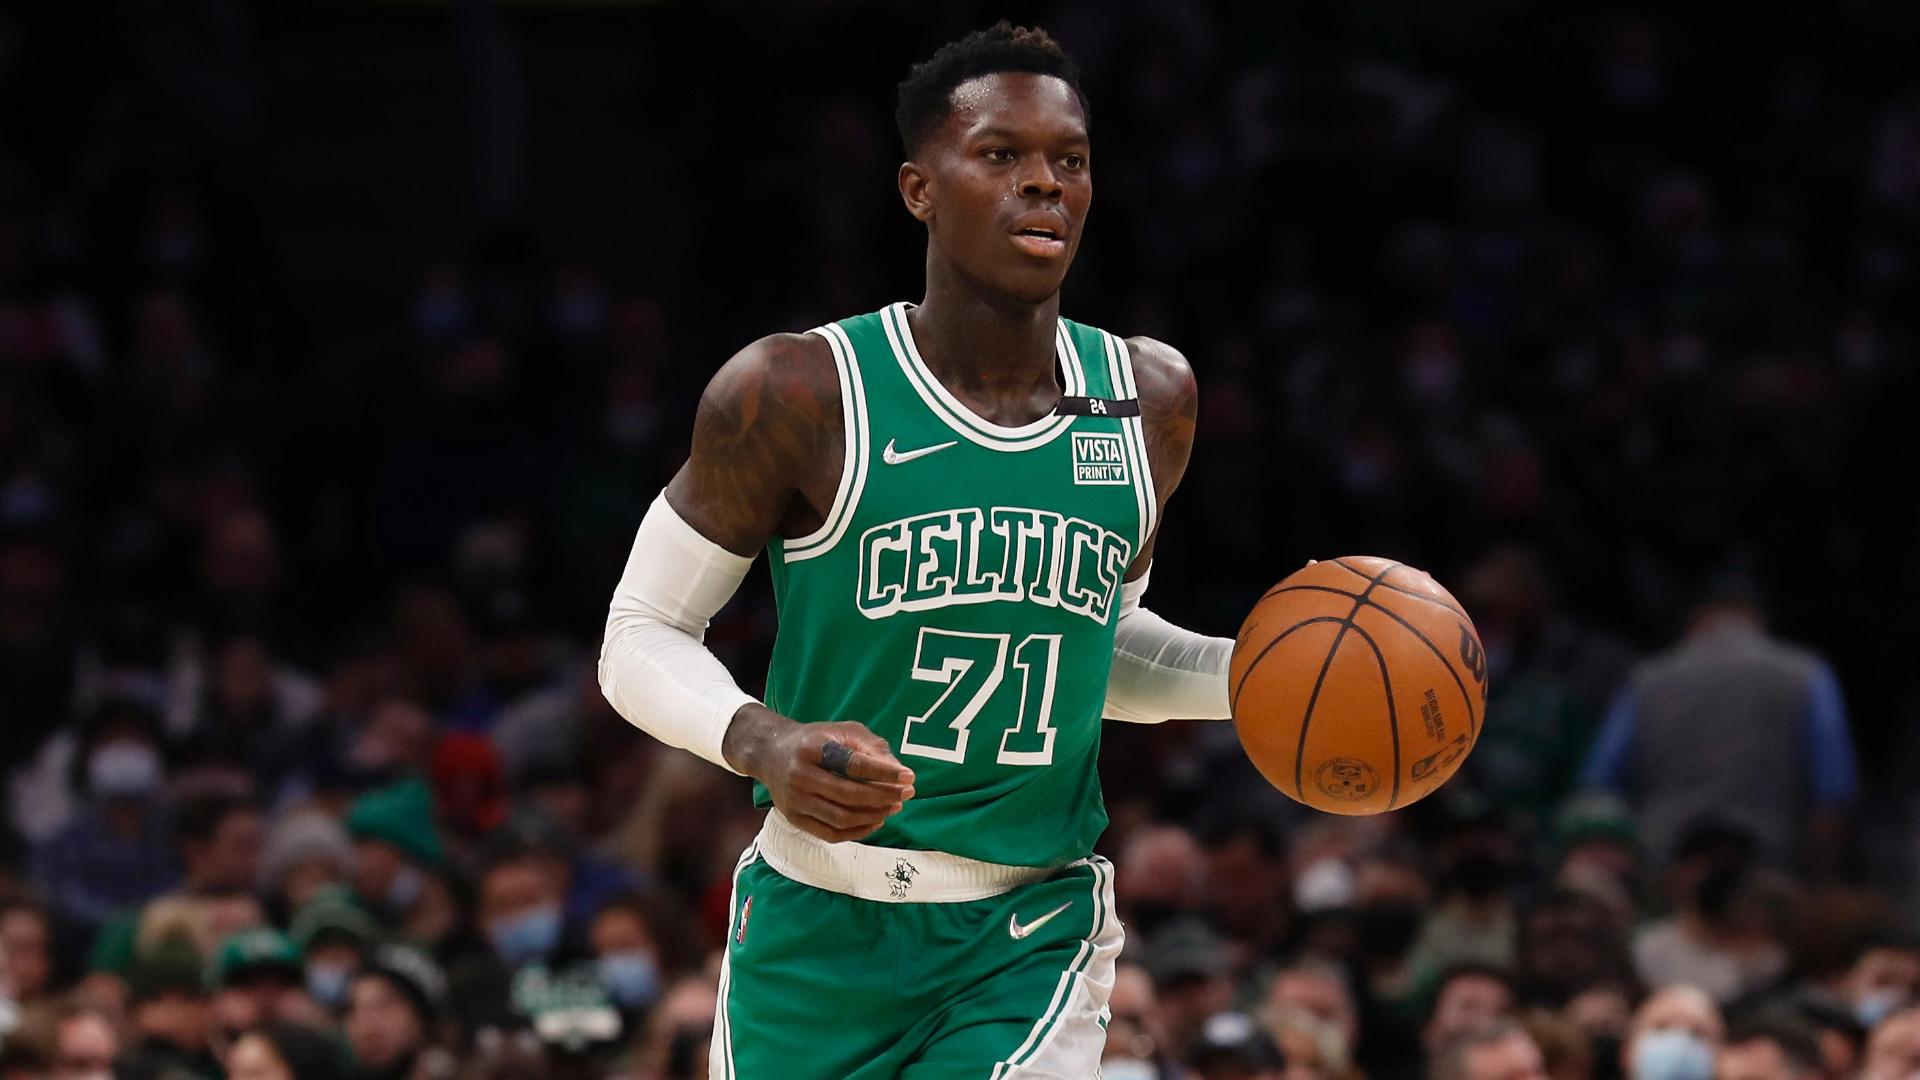 Lakers' Dennis Schroder out at least 3 weeks after thumb surgery